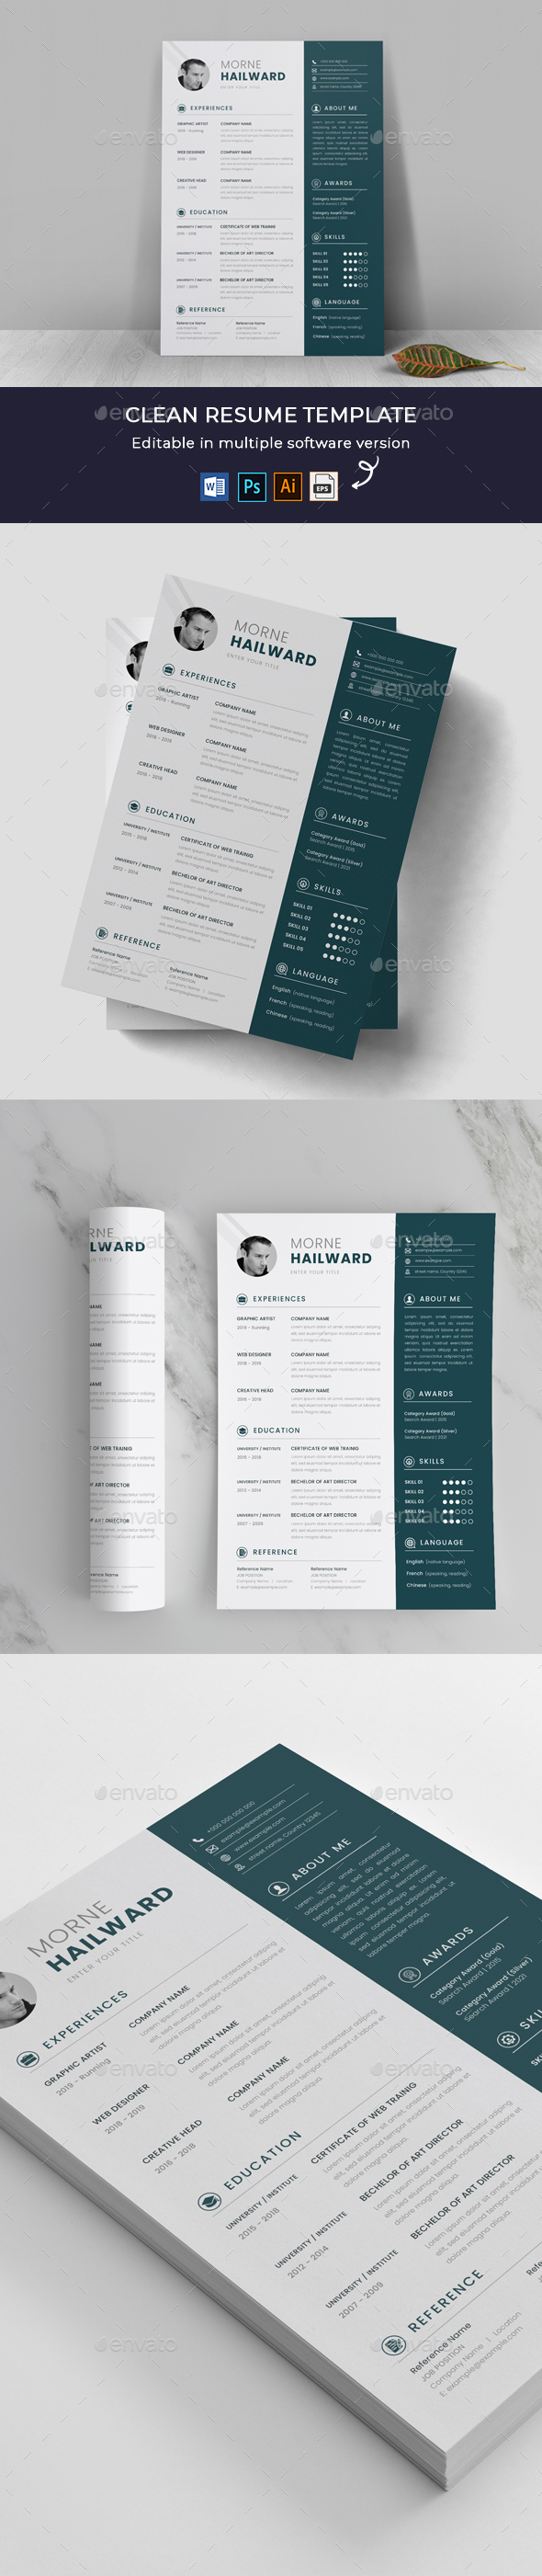 [DOWNLOAD]Resume Template